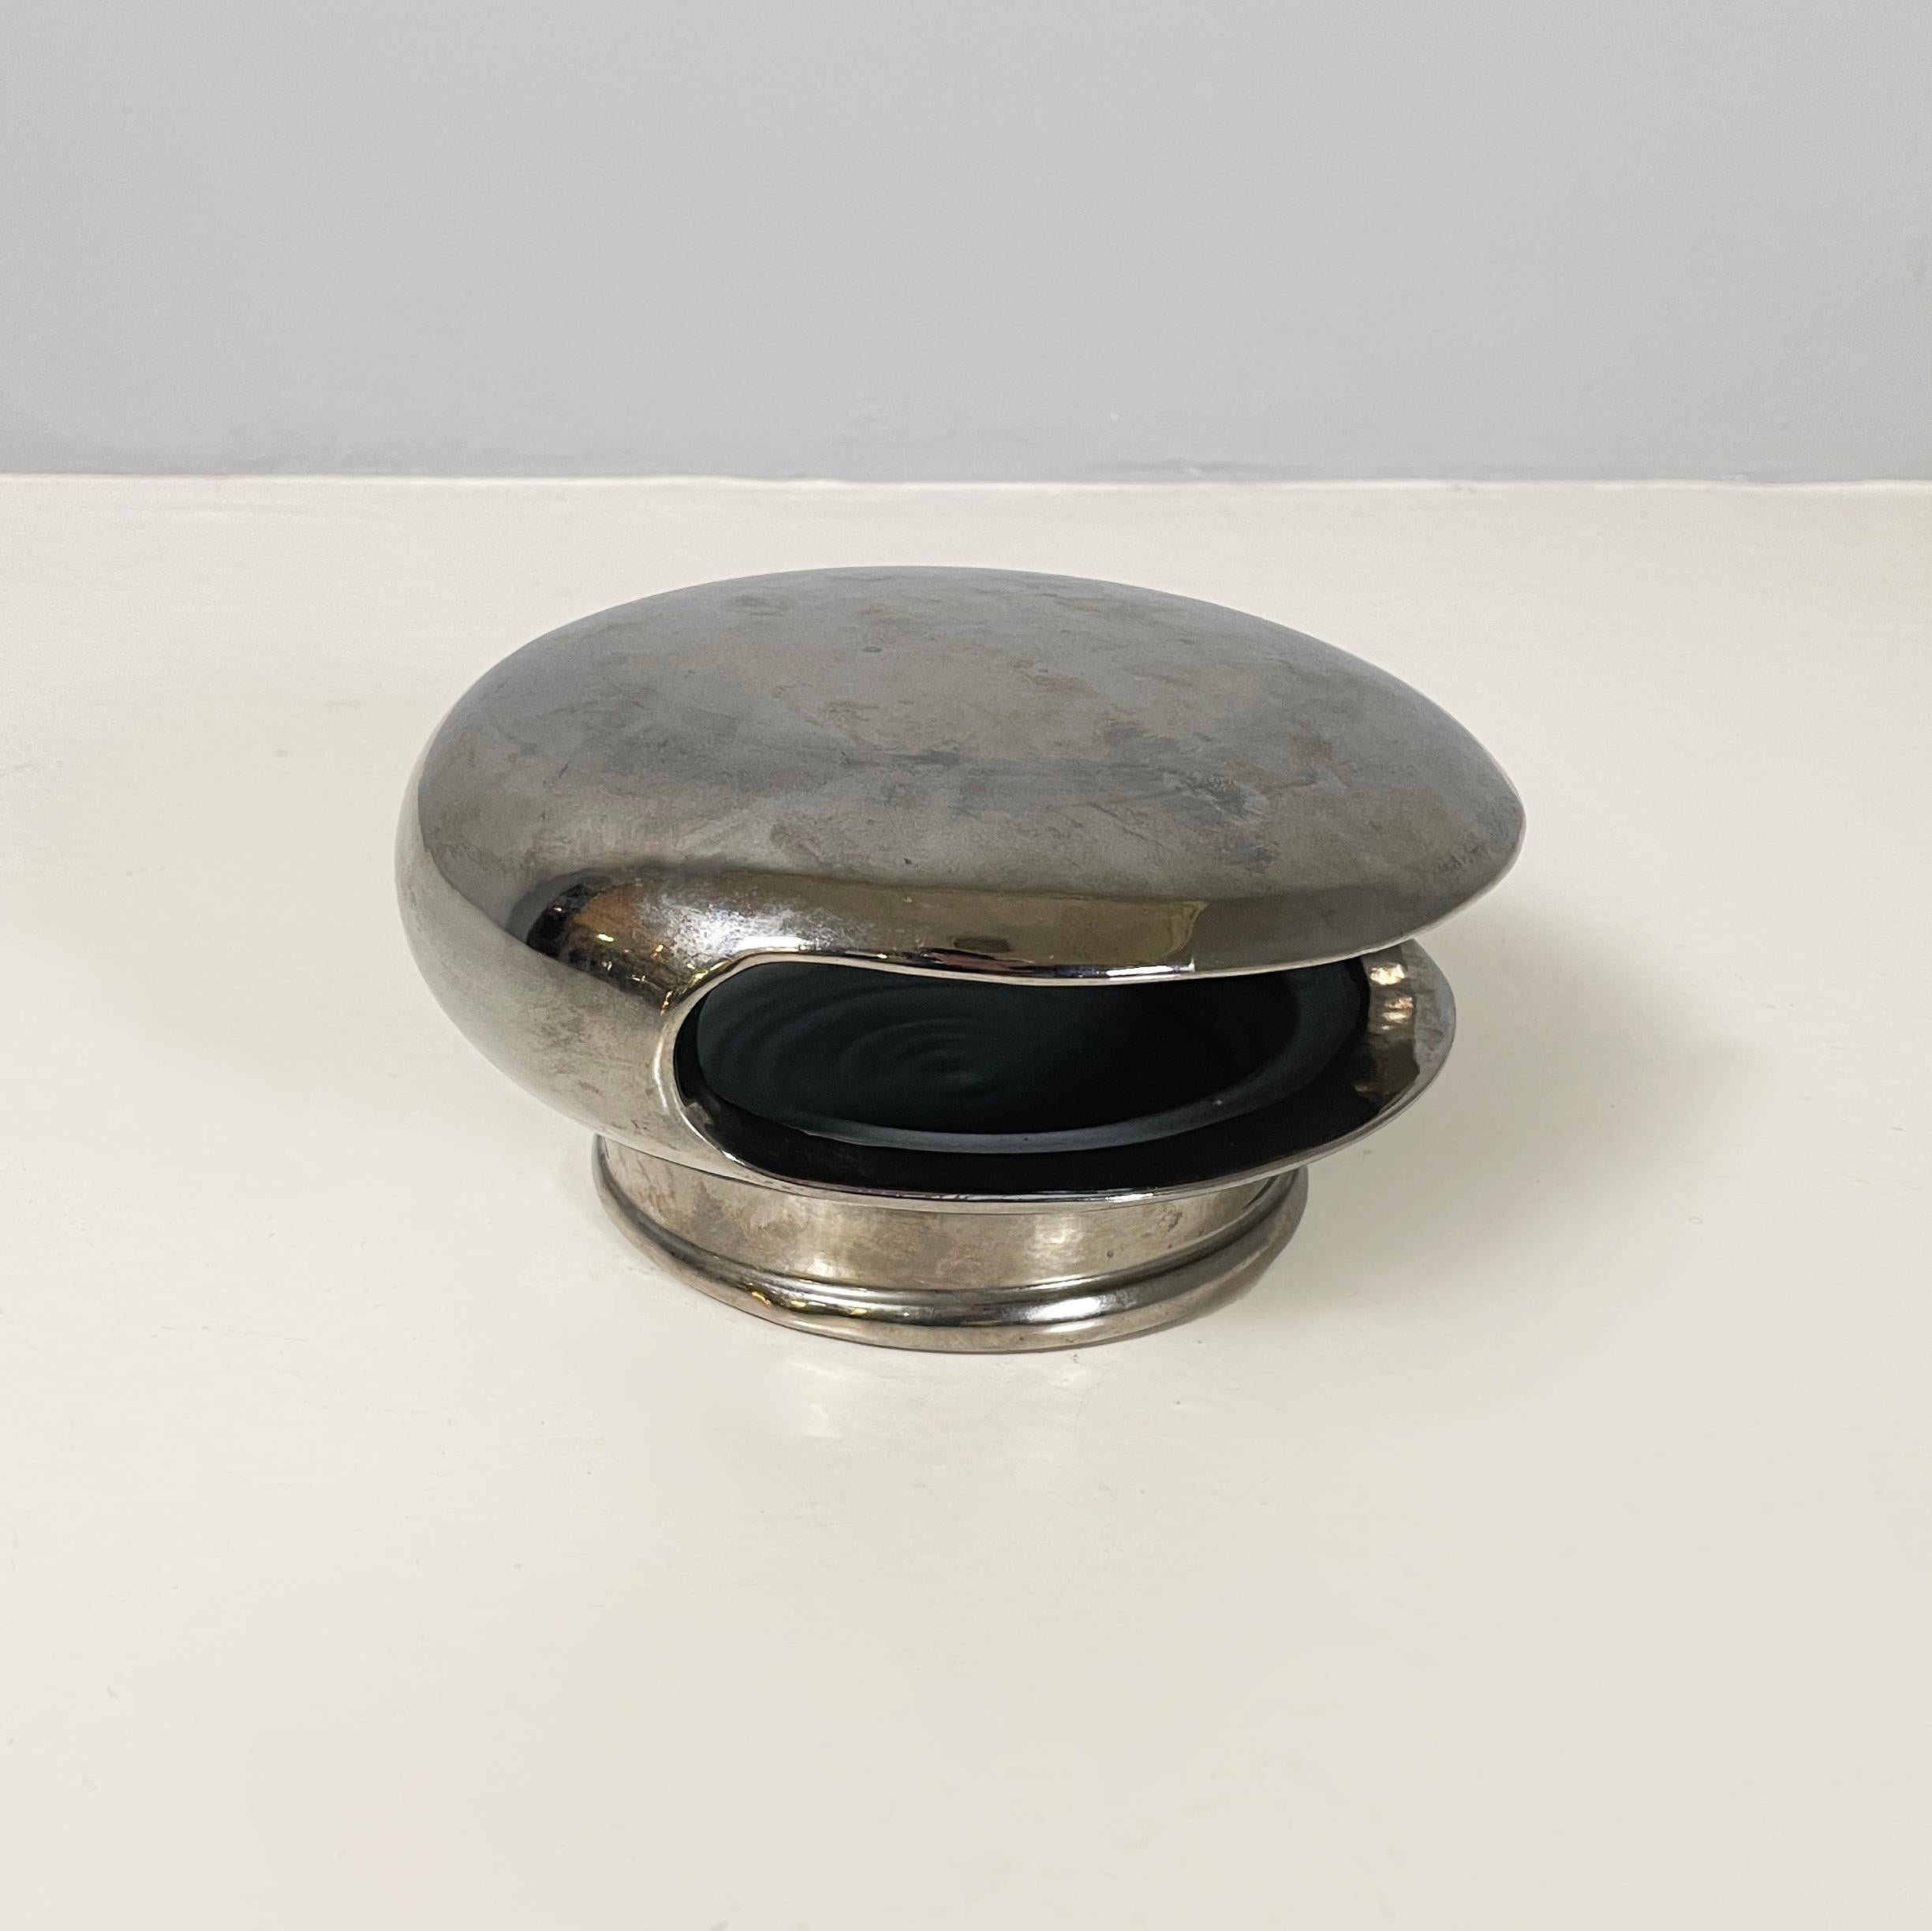 Modern Italian modern Decorative table object or sculpture in silver ceramic, 2000s For Sale